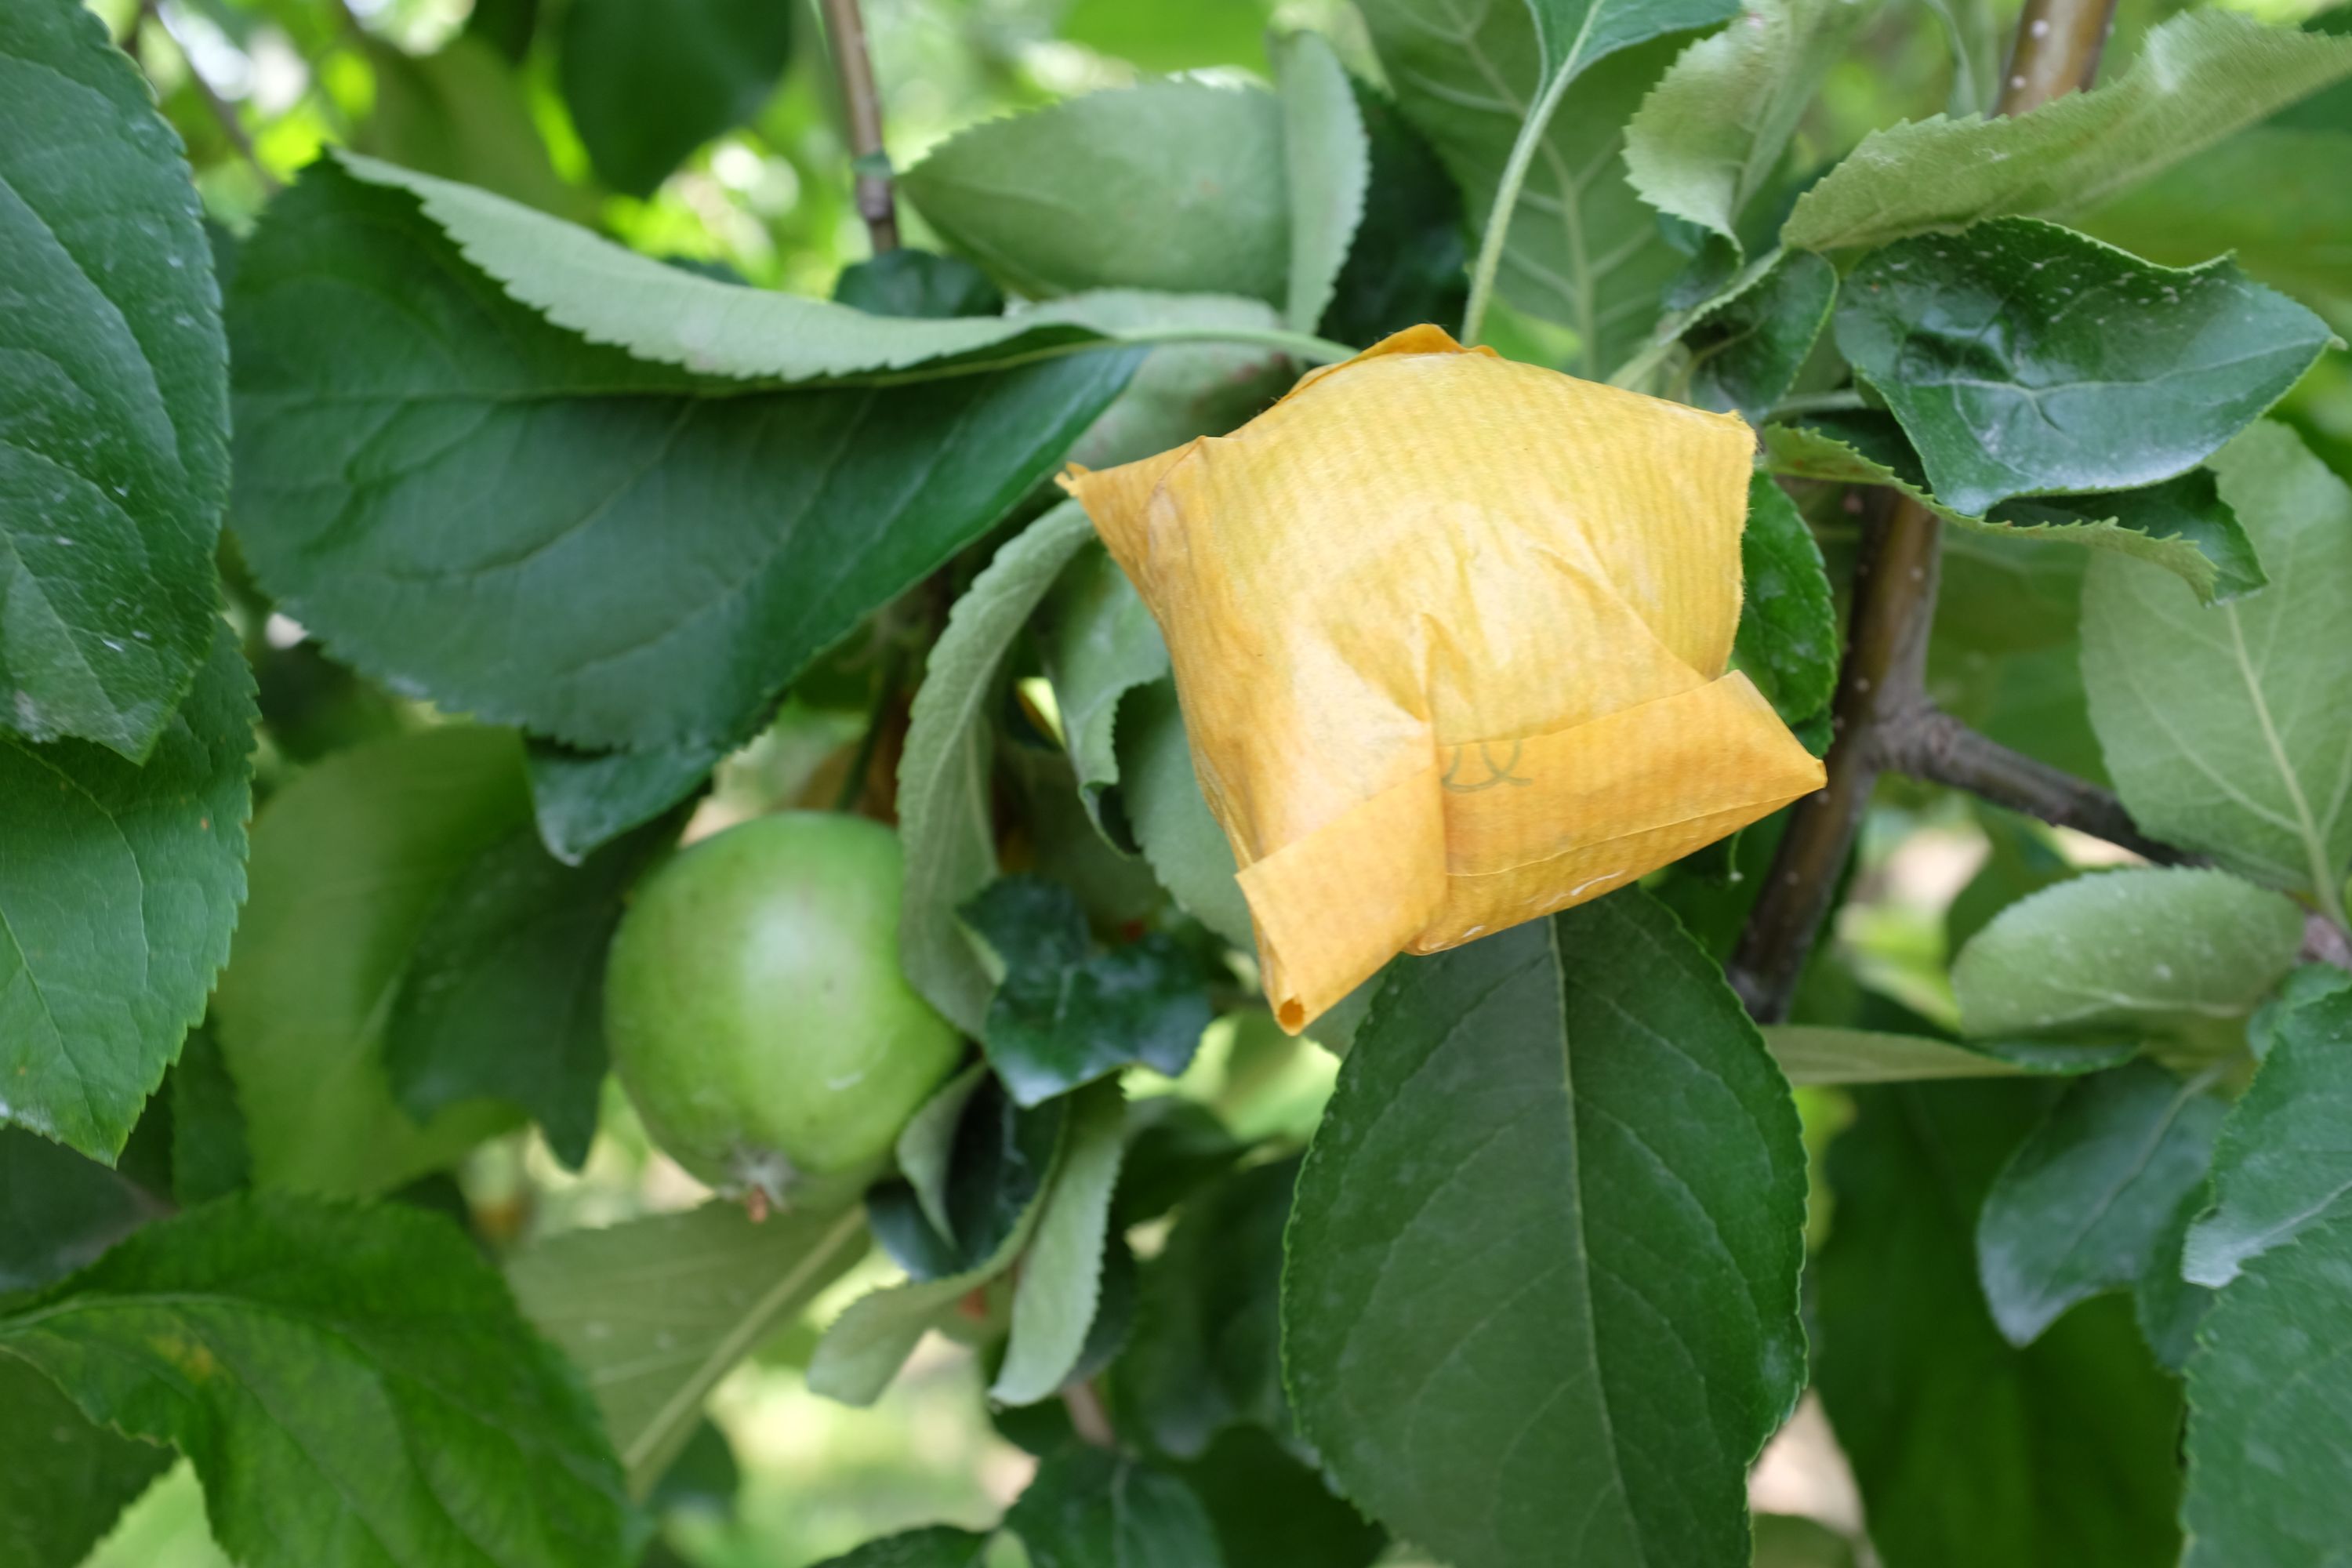 An unripe apple wrapped in its own paper bag, in the Japanese style.